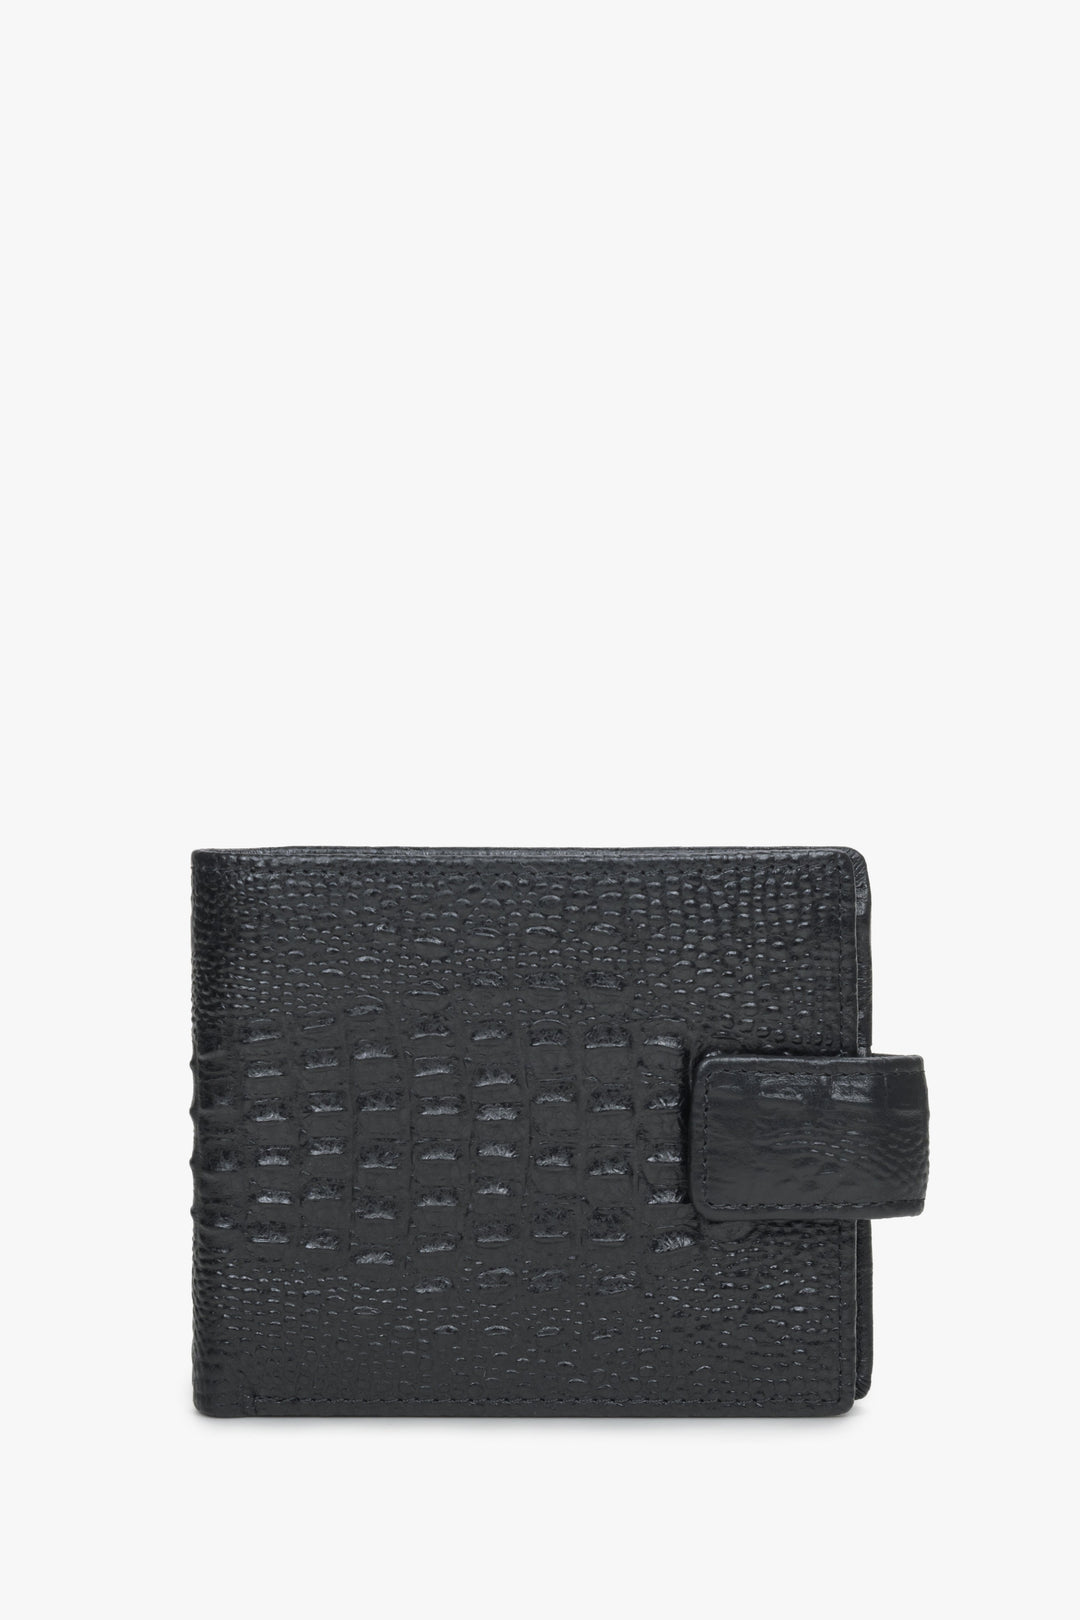 Men's Black Wallet with a Clasp made of Embossed Genuine Leather Estro ER00114492.